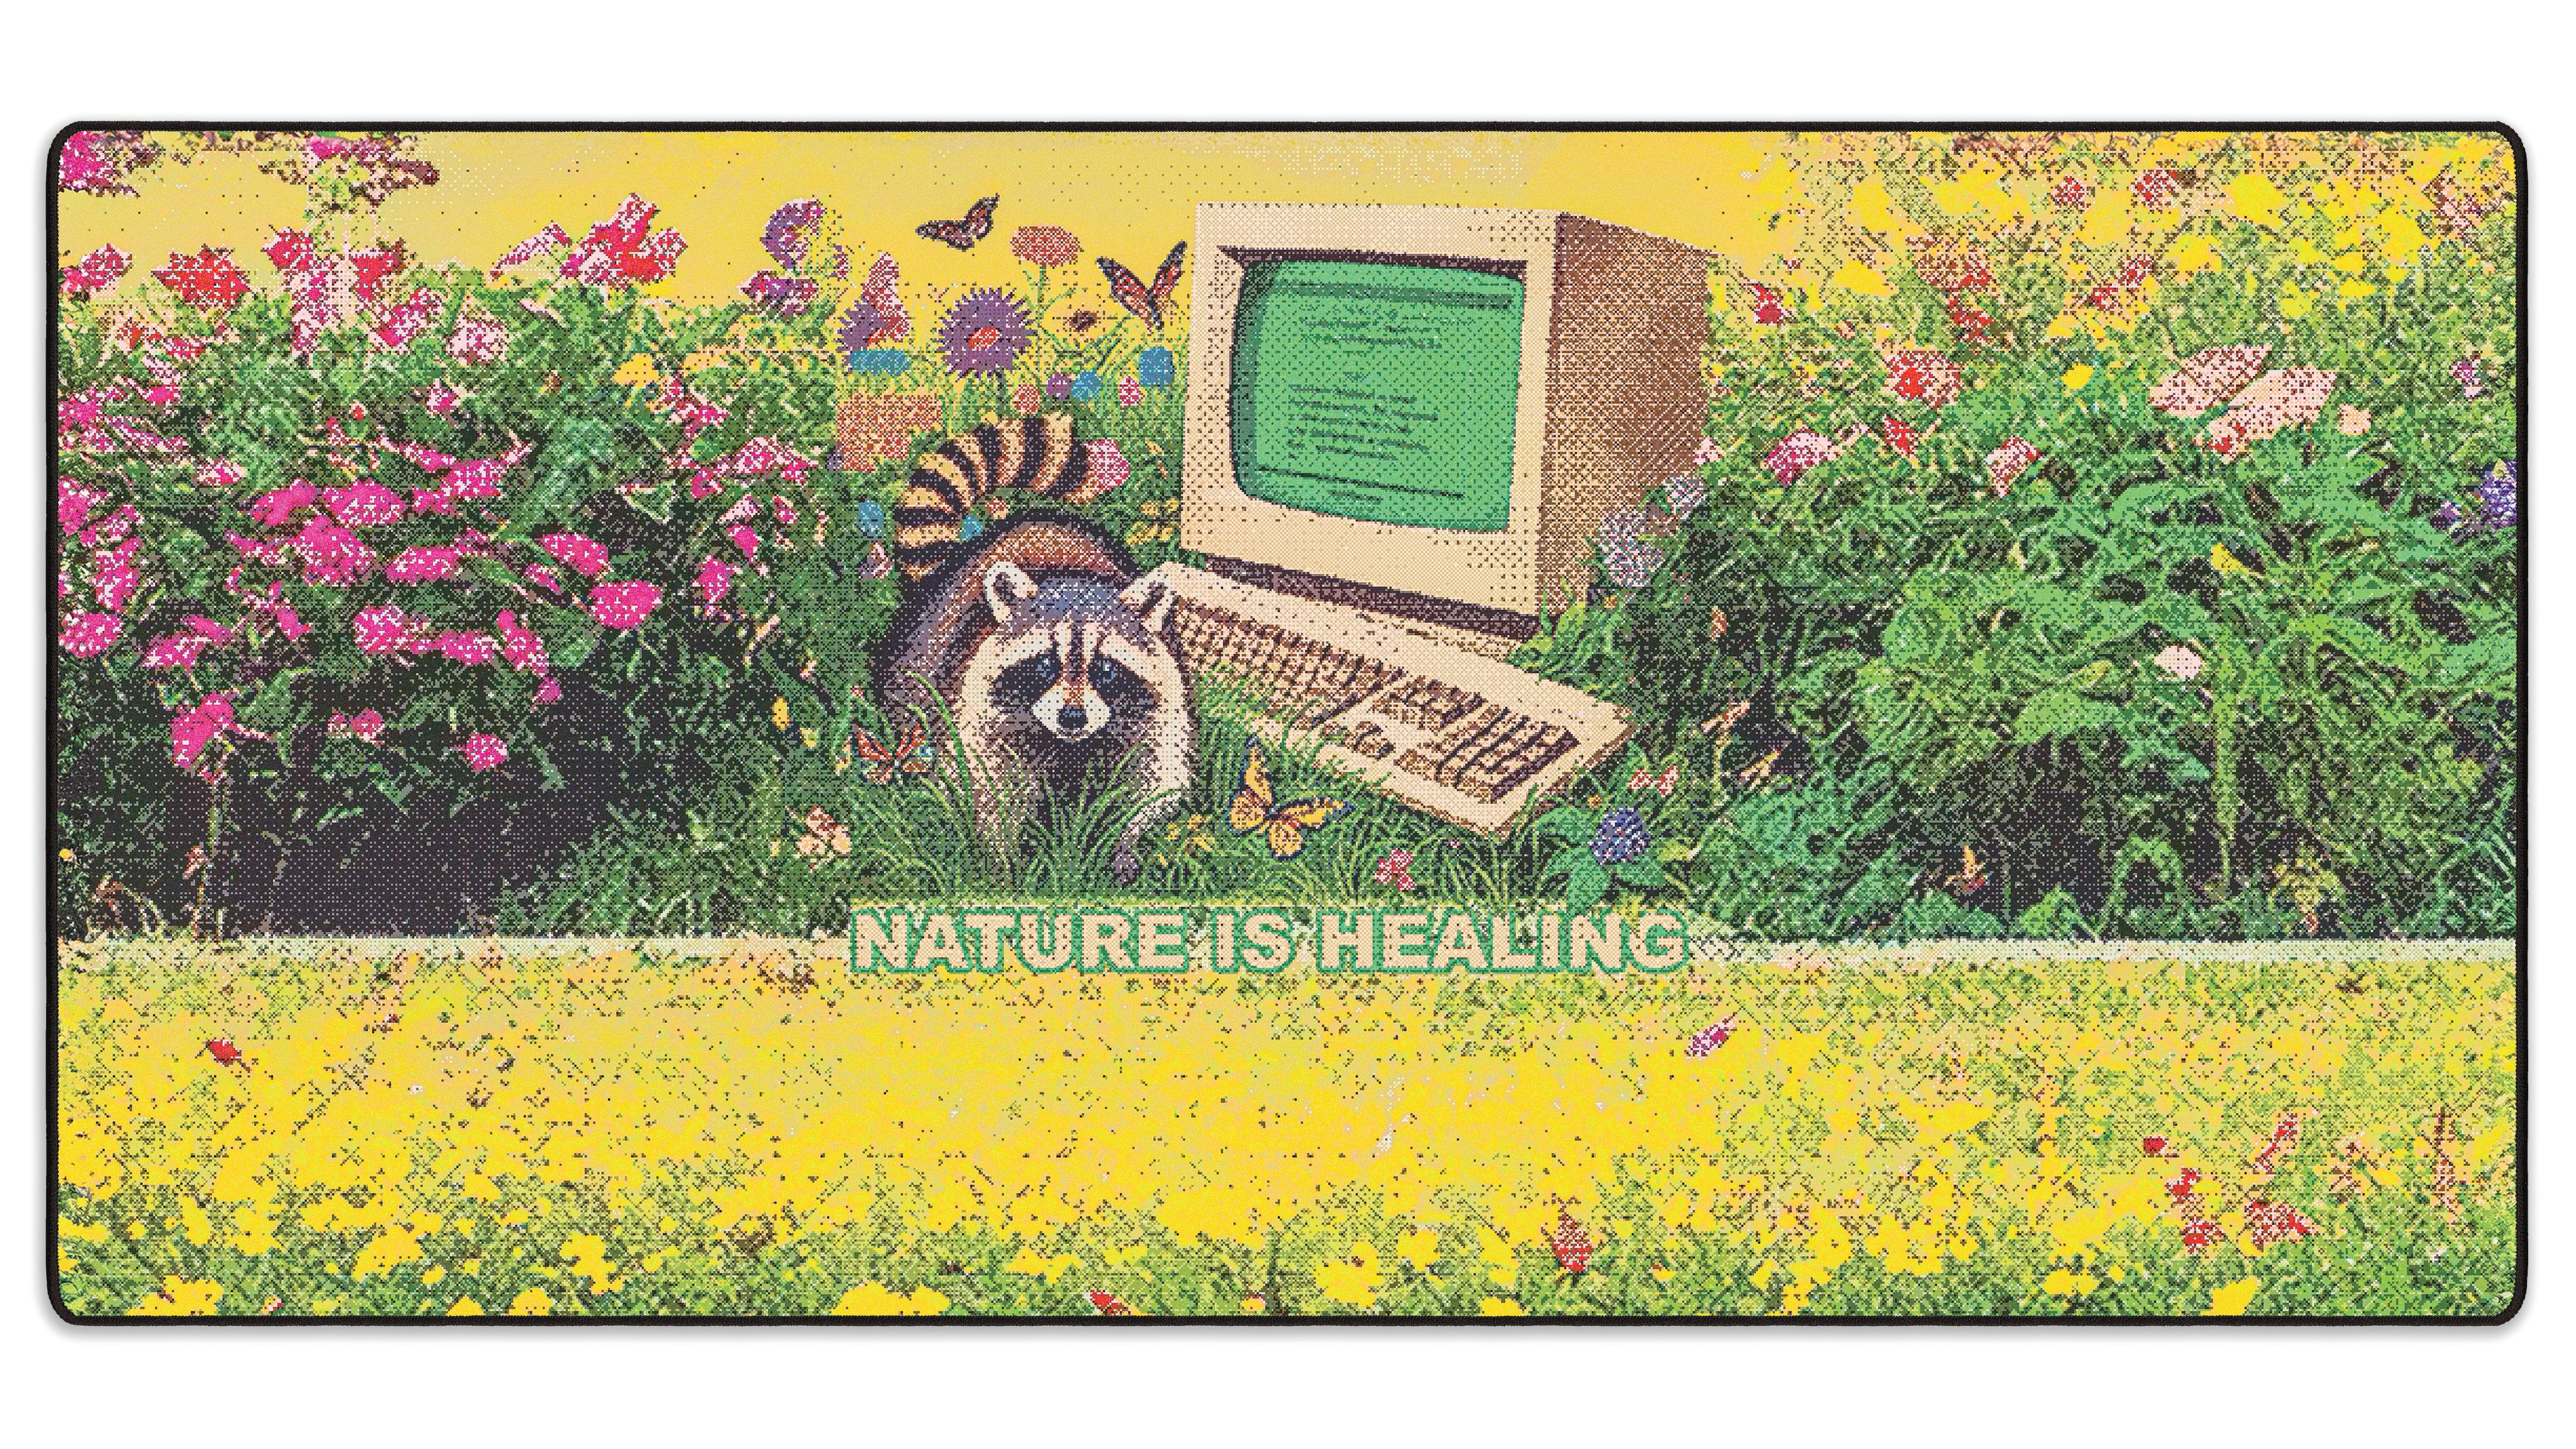 Nature is Healing, by Dogecore - The Mousepad Company